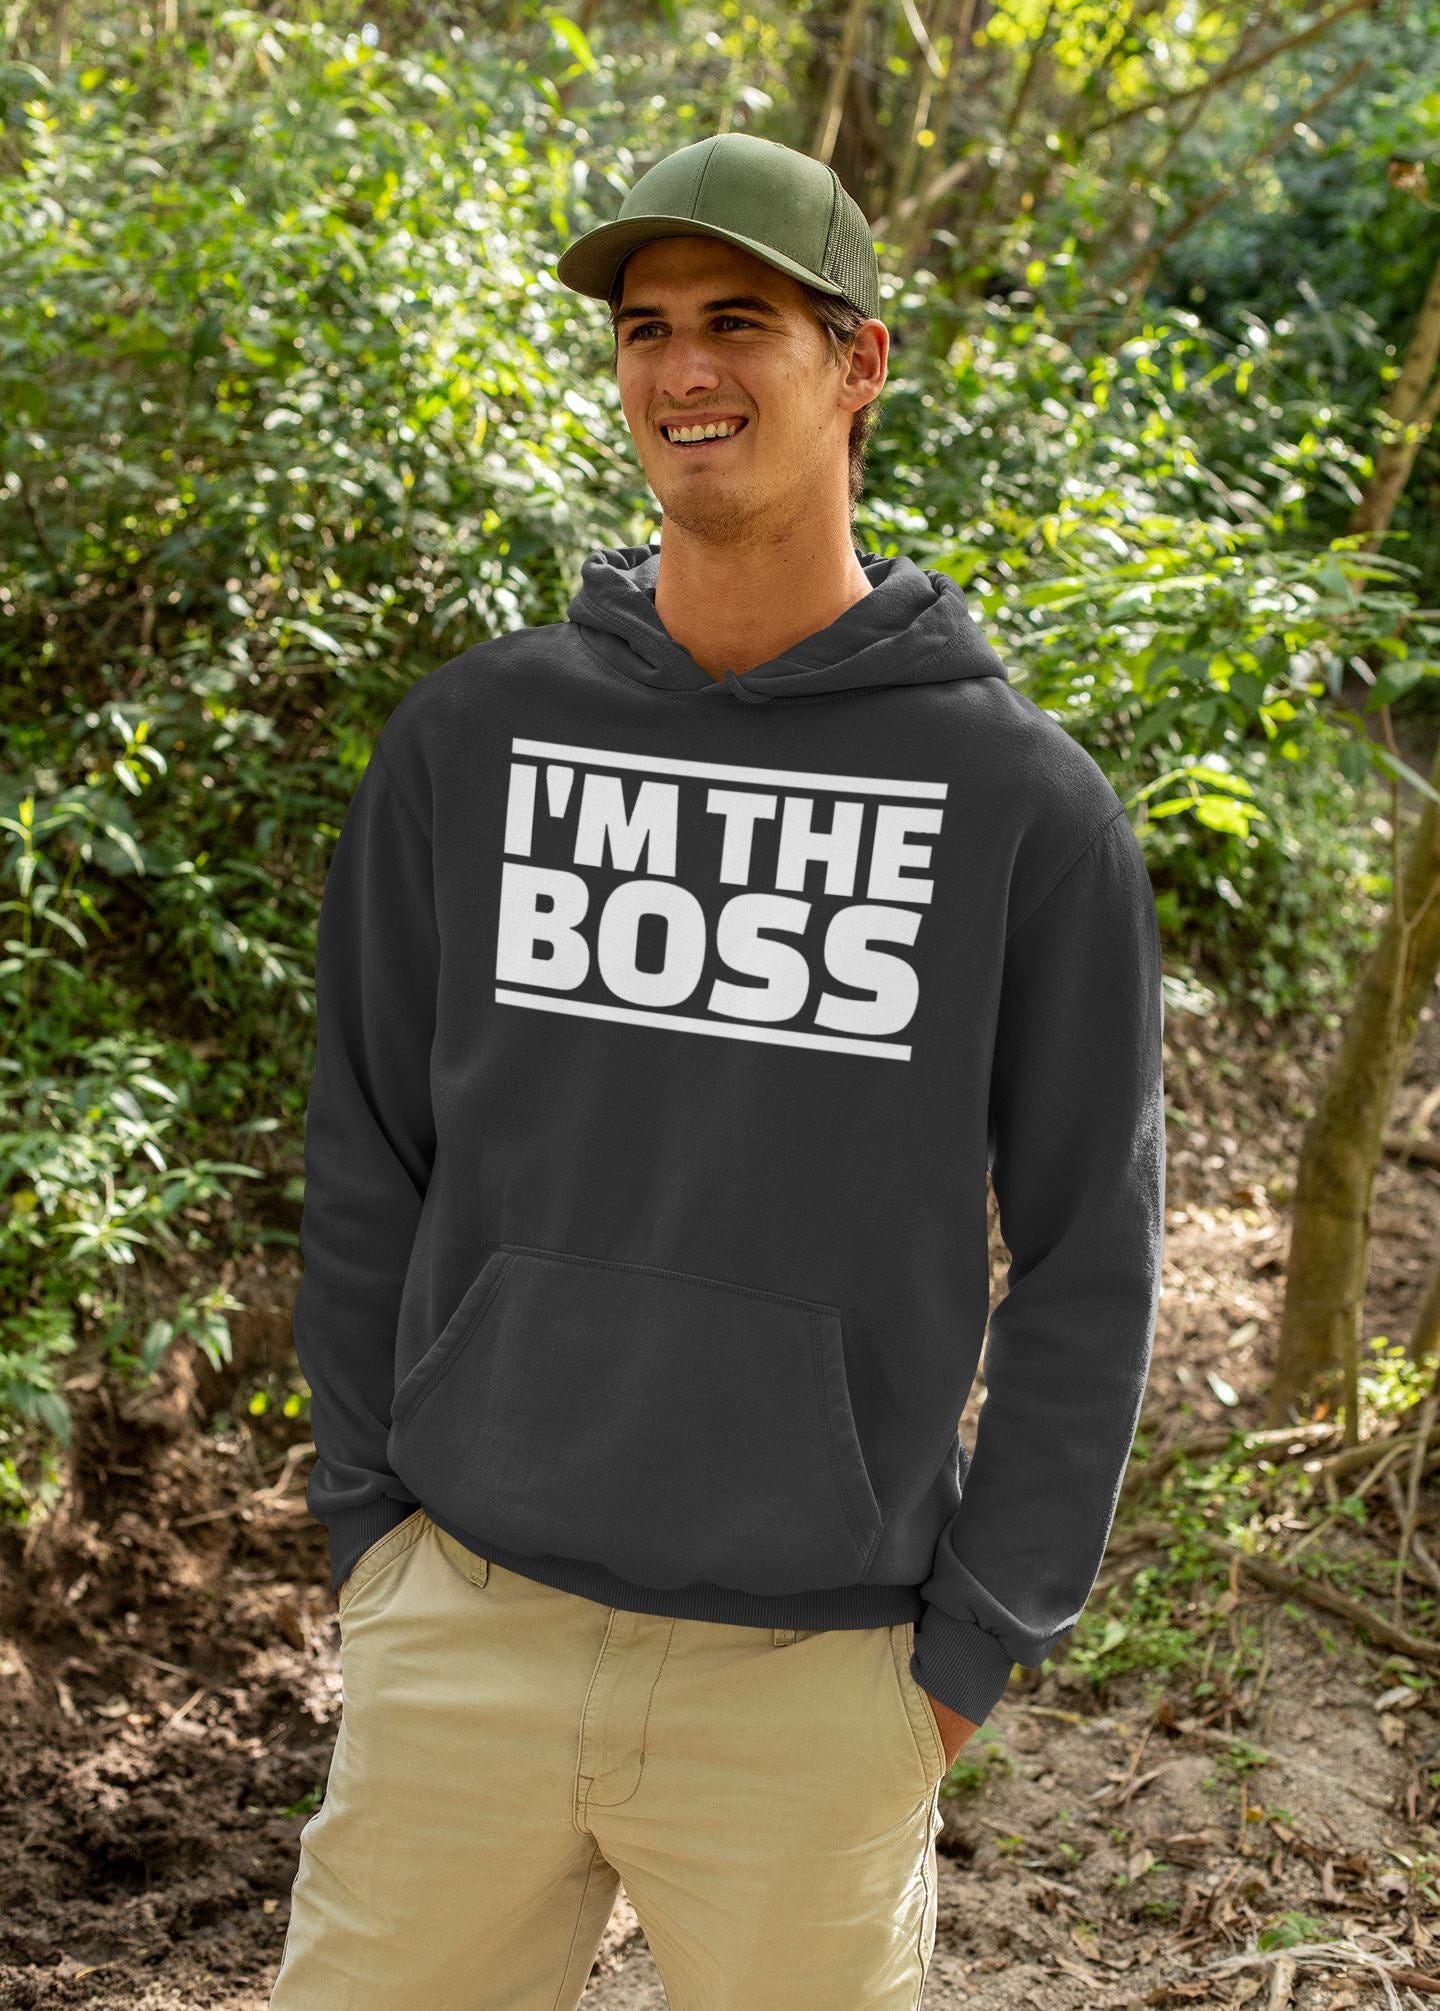 I'm The Boss Exclusive Black Hoodie for Men and Women freeshipping - Catch My Drift India